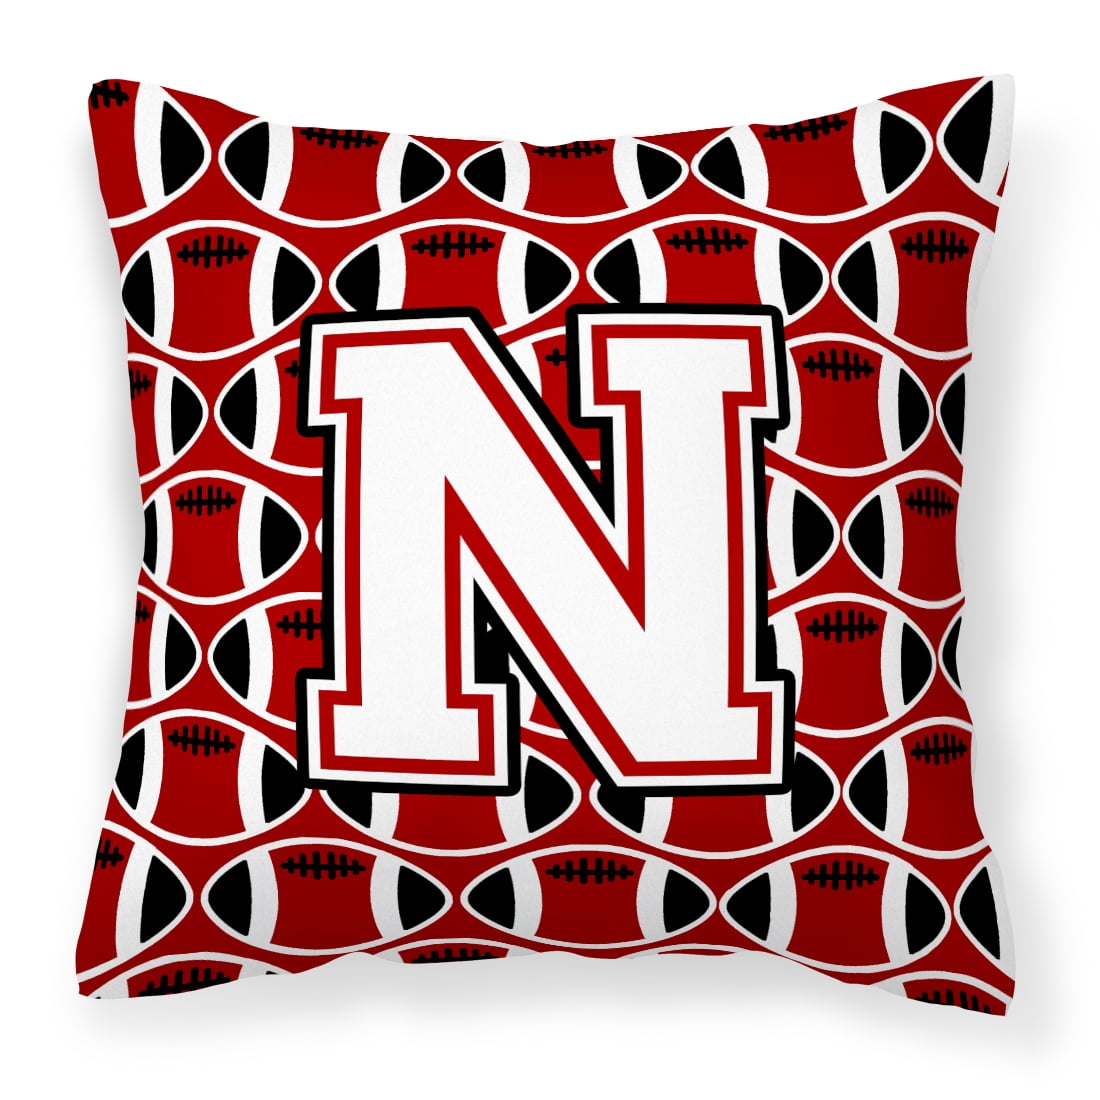 Letter N Football Cardinal and White Fabric Decorative Pillow - Walmart.com